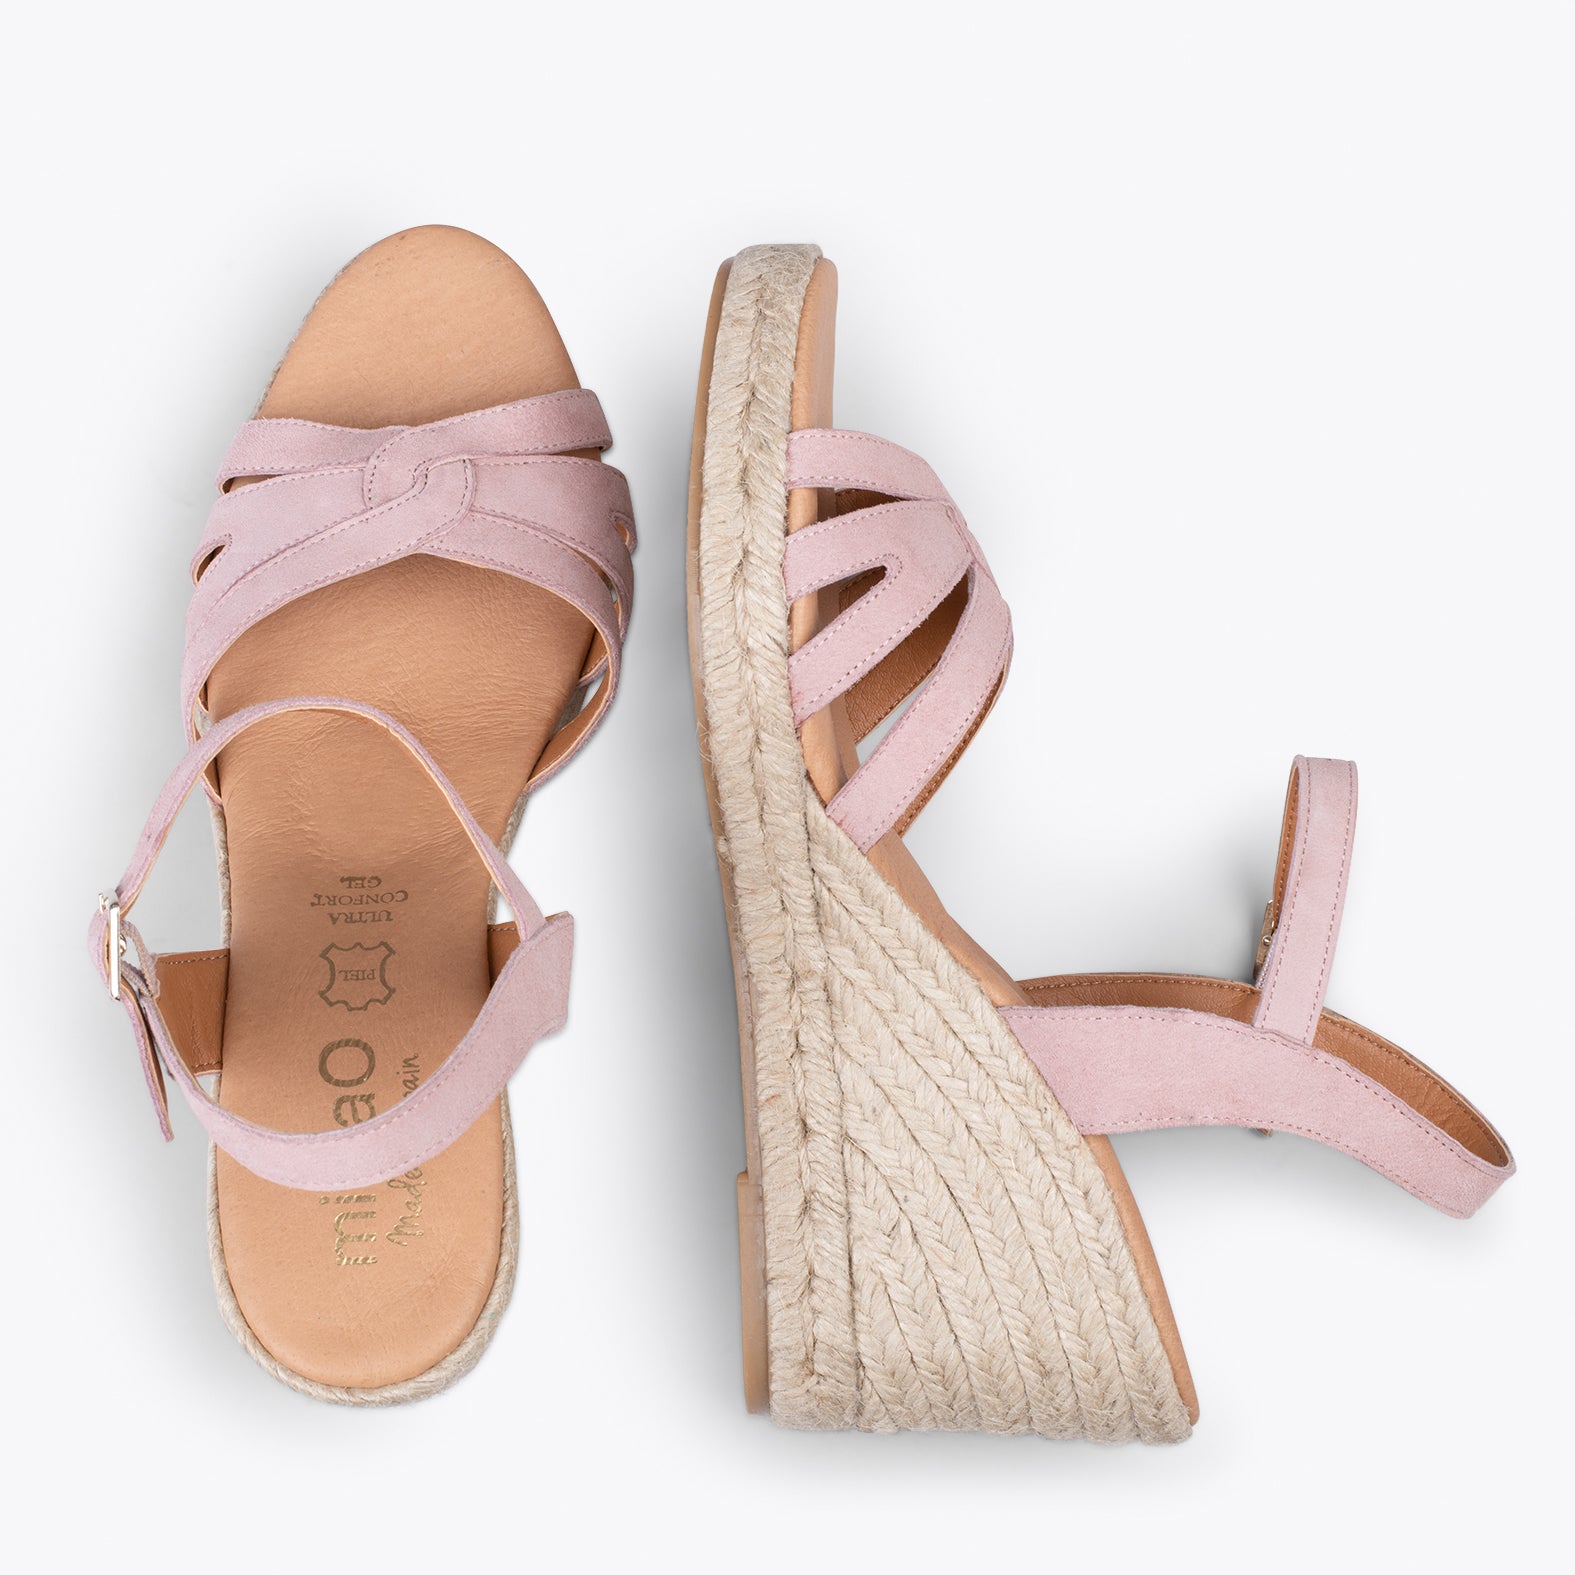 HOYAMBRE – PINK espadrilles with braided front